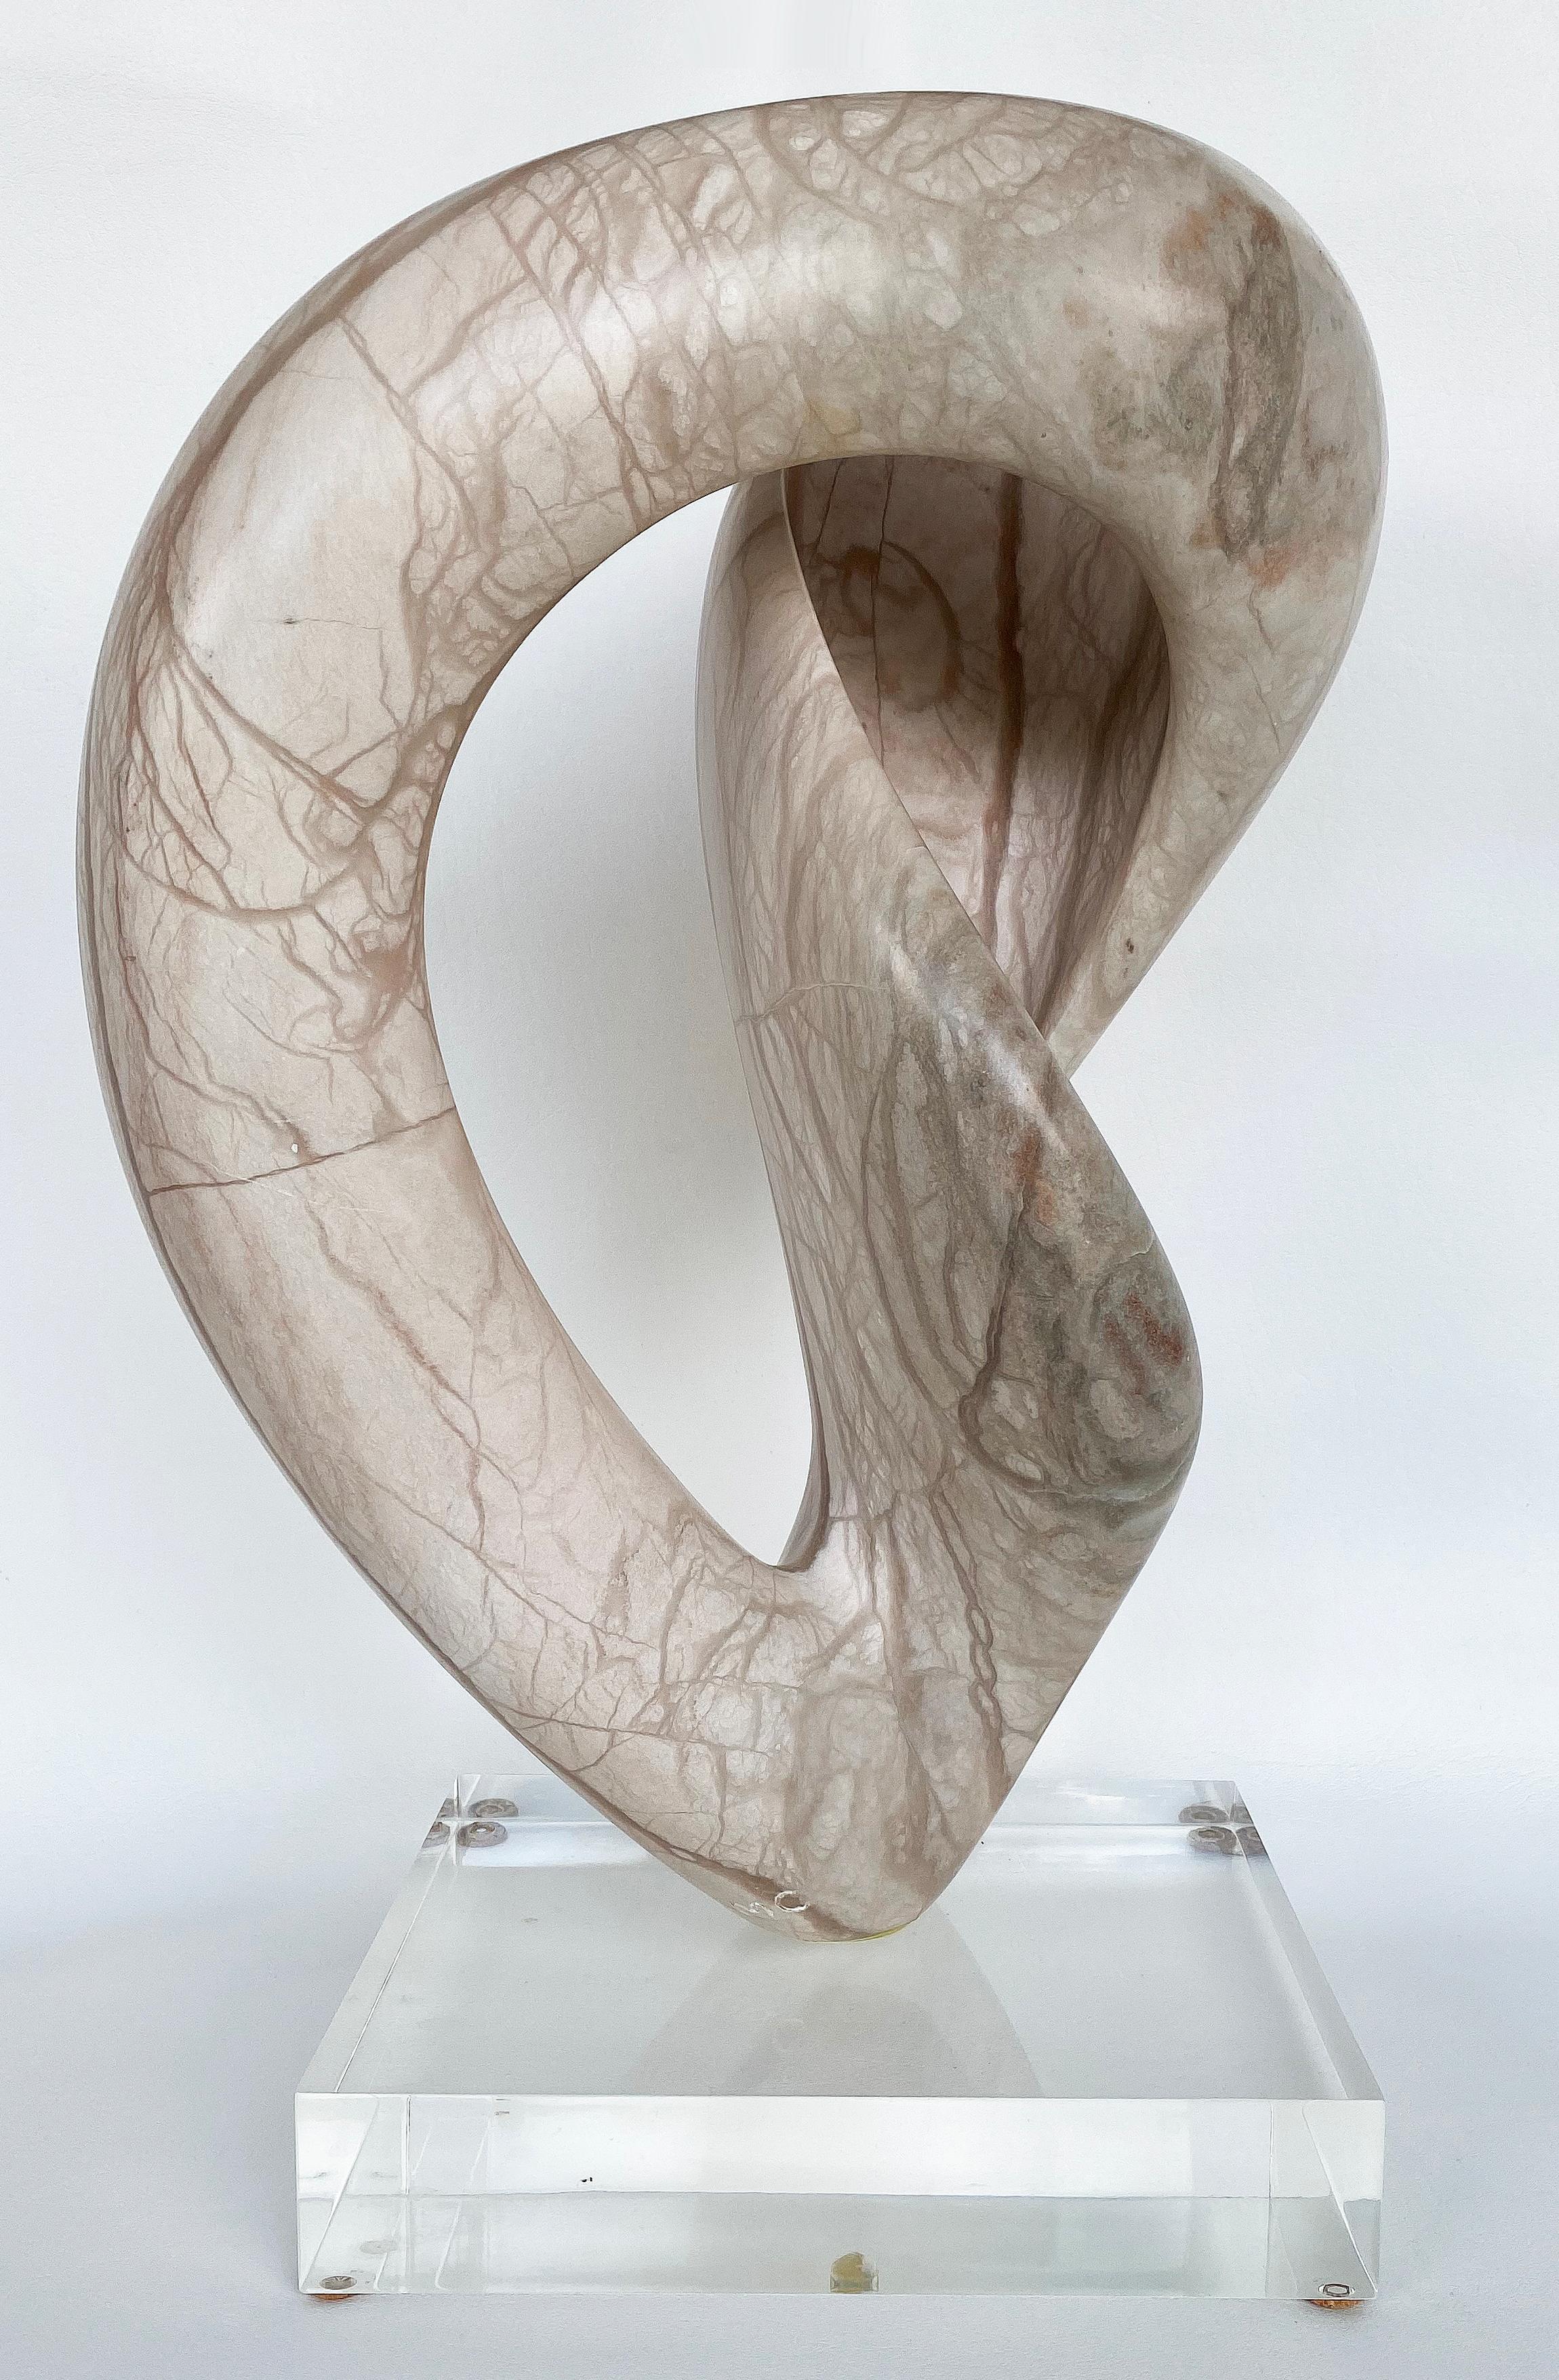 Free-form Abstract Veined marble sculpture Signed SMO on a Lucite base

Offered for sale is a free-form abstract veined marble sculpture atop a lucite base. It is signed SMO on the base of the sculpture. This is a large and decorative sculpture